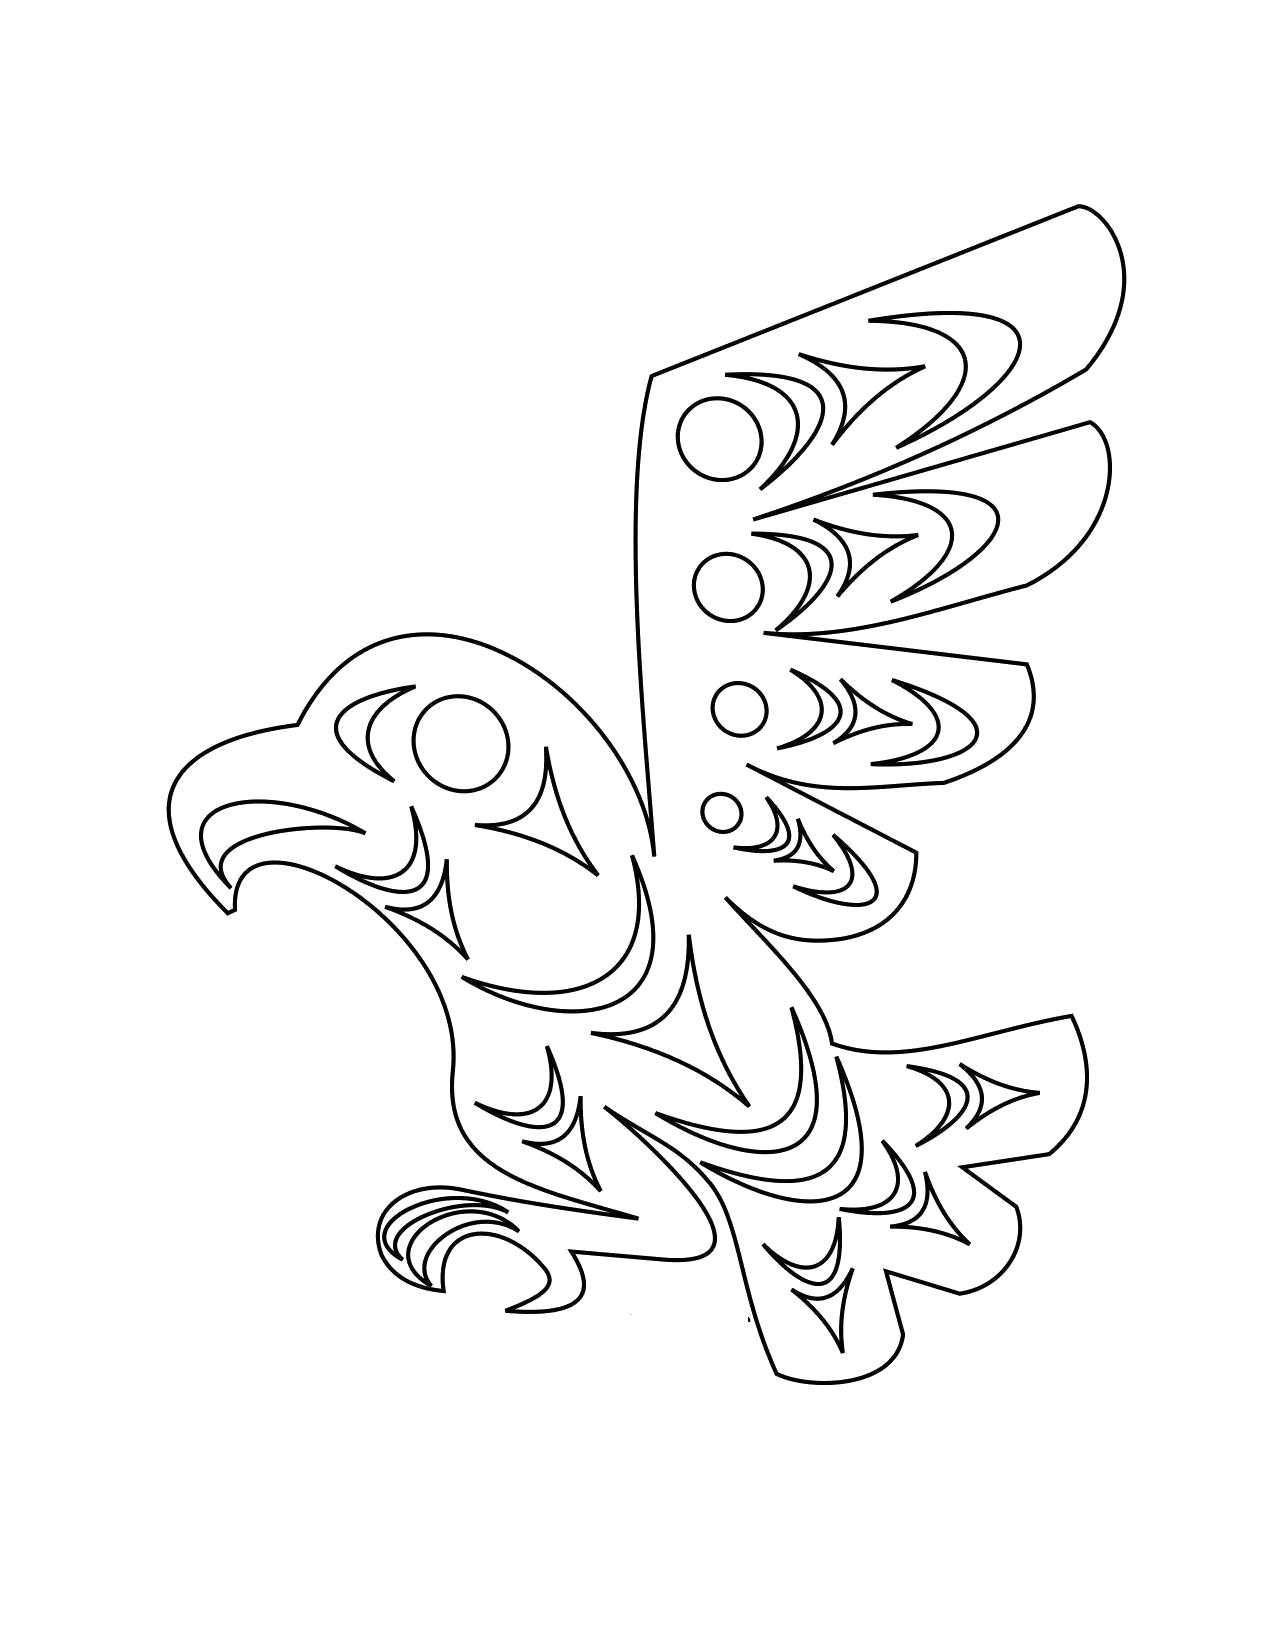 Coloring Crow. Category The contours for cutting out the birds. Tags:  crow.